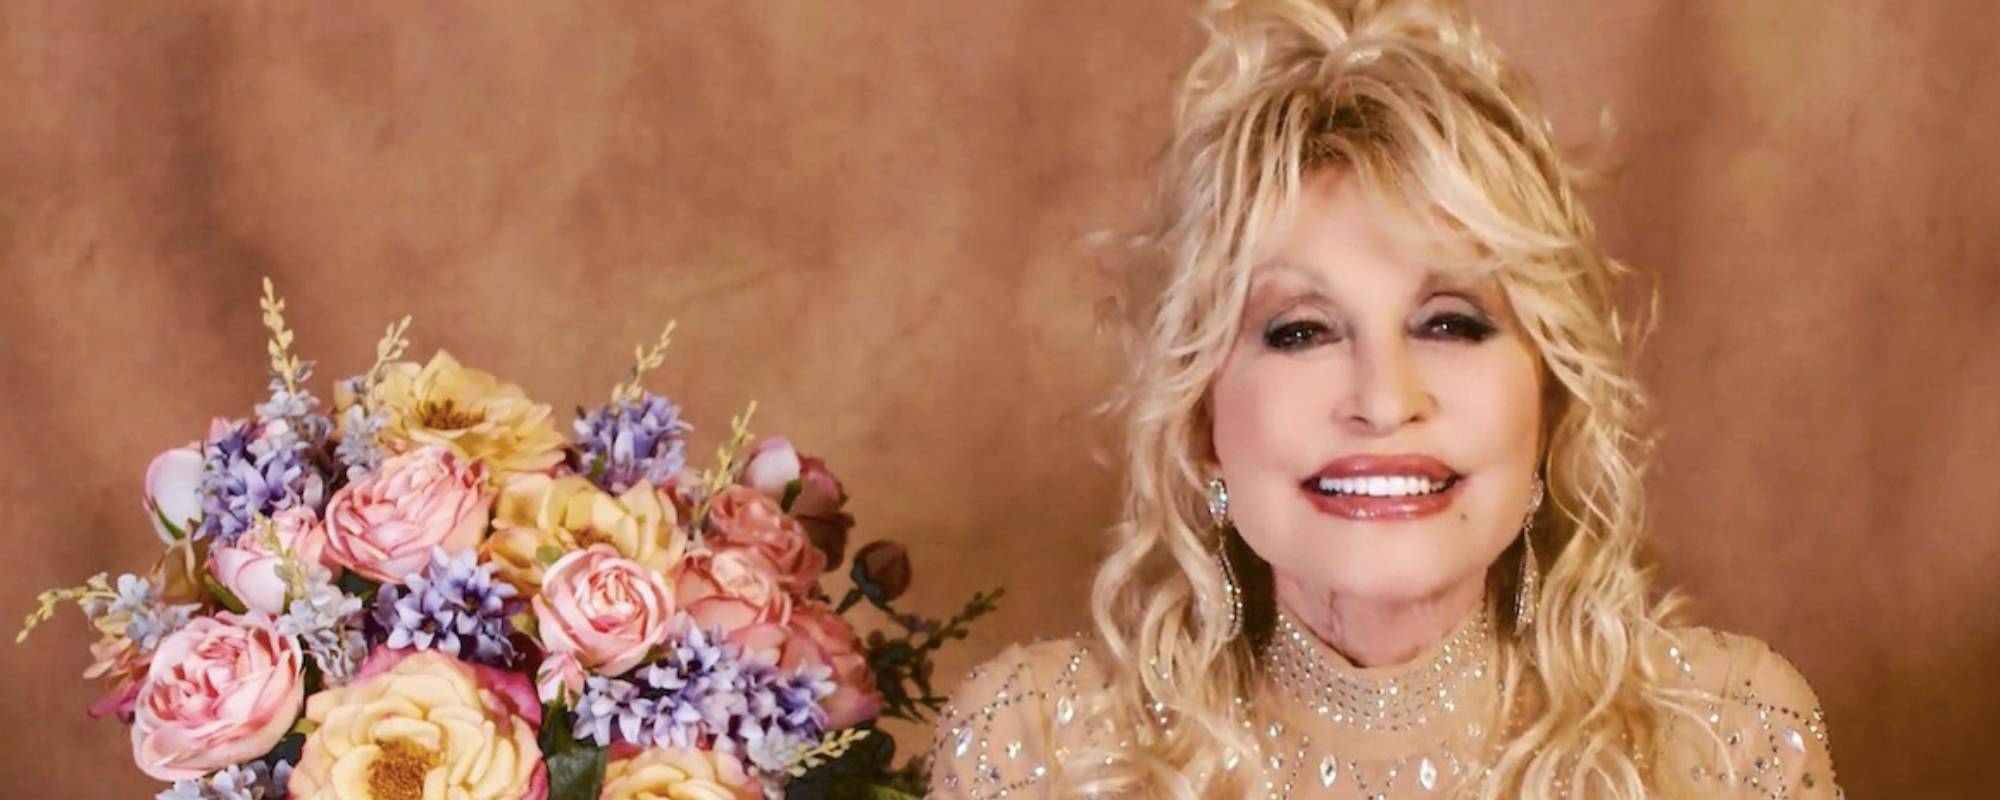 Review: Dolly Parton’s ‘Rockstar’ is a Trip Through Rock’s Greatest Songs